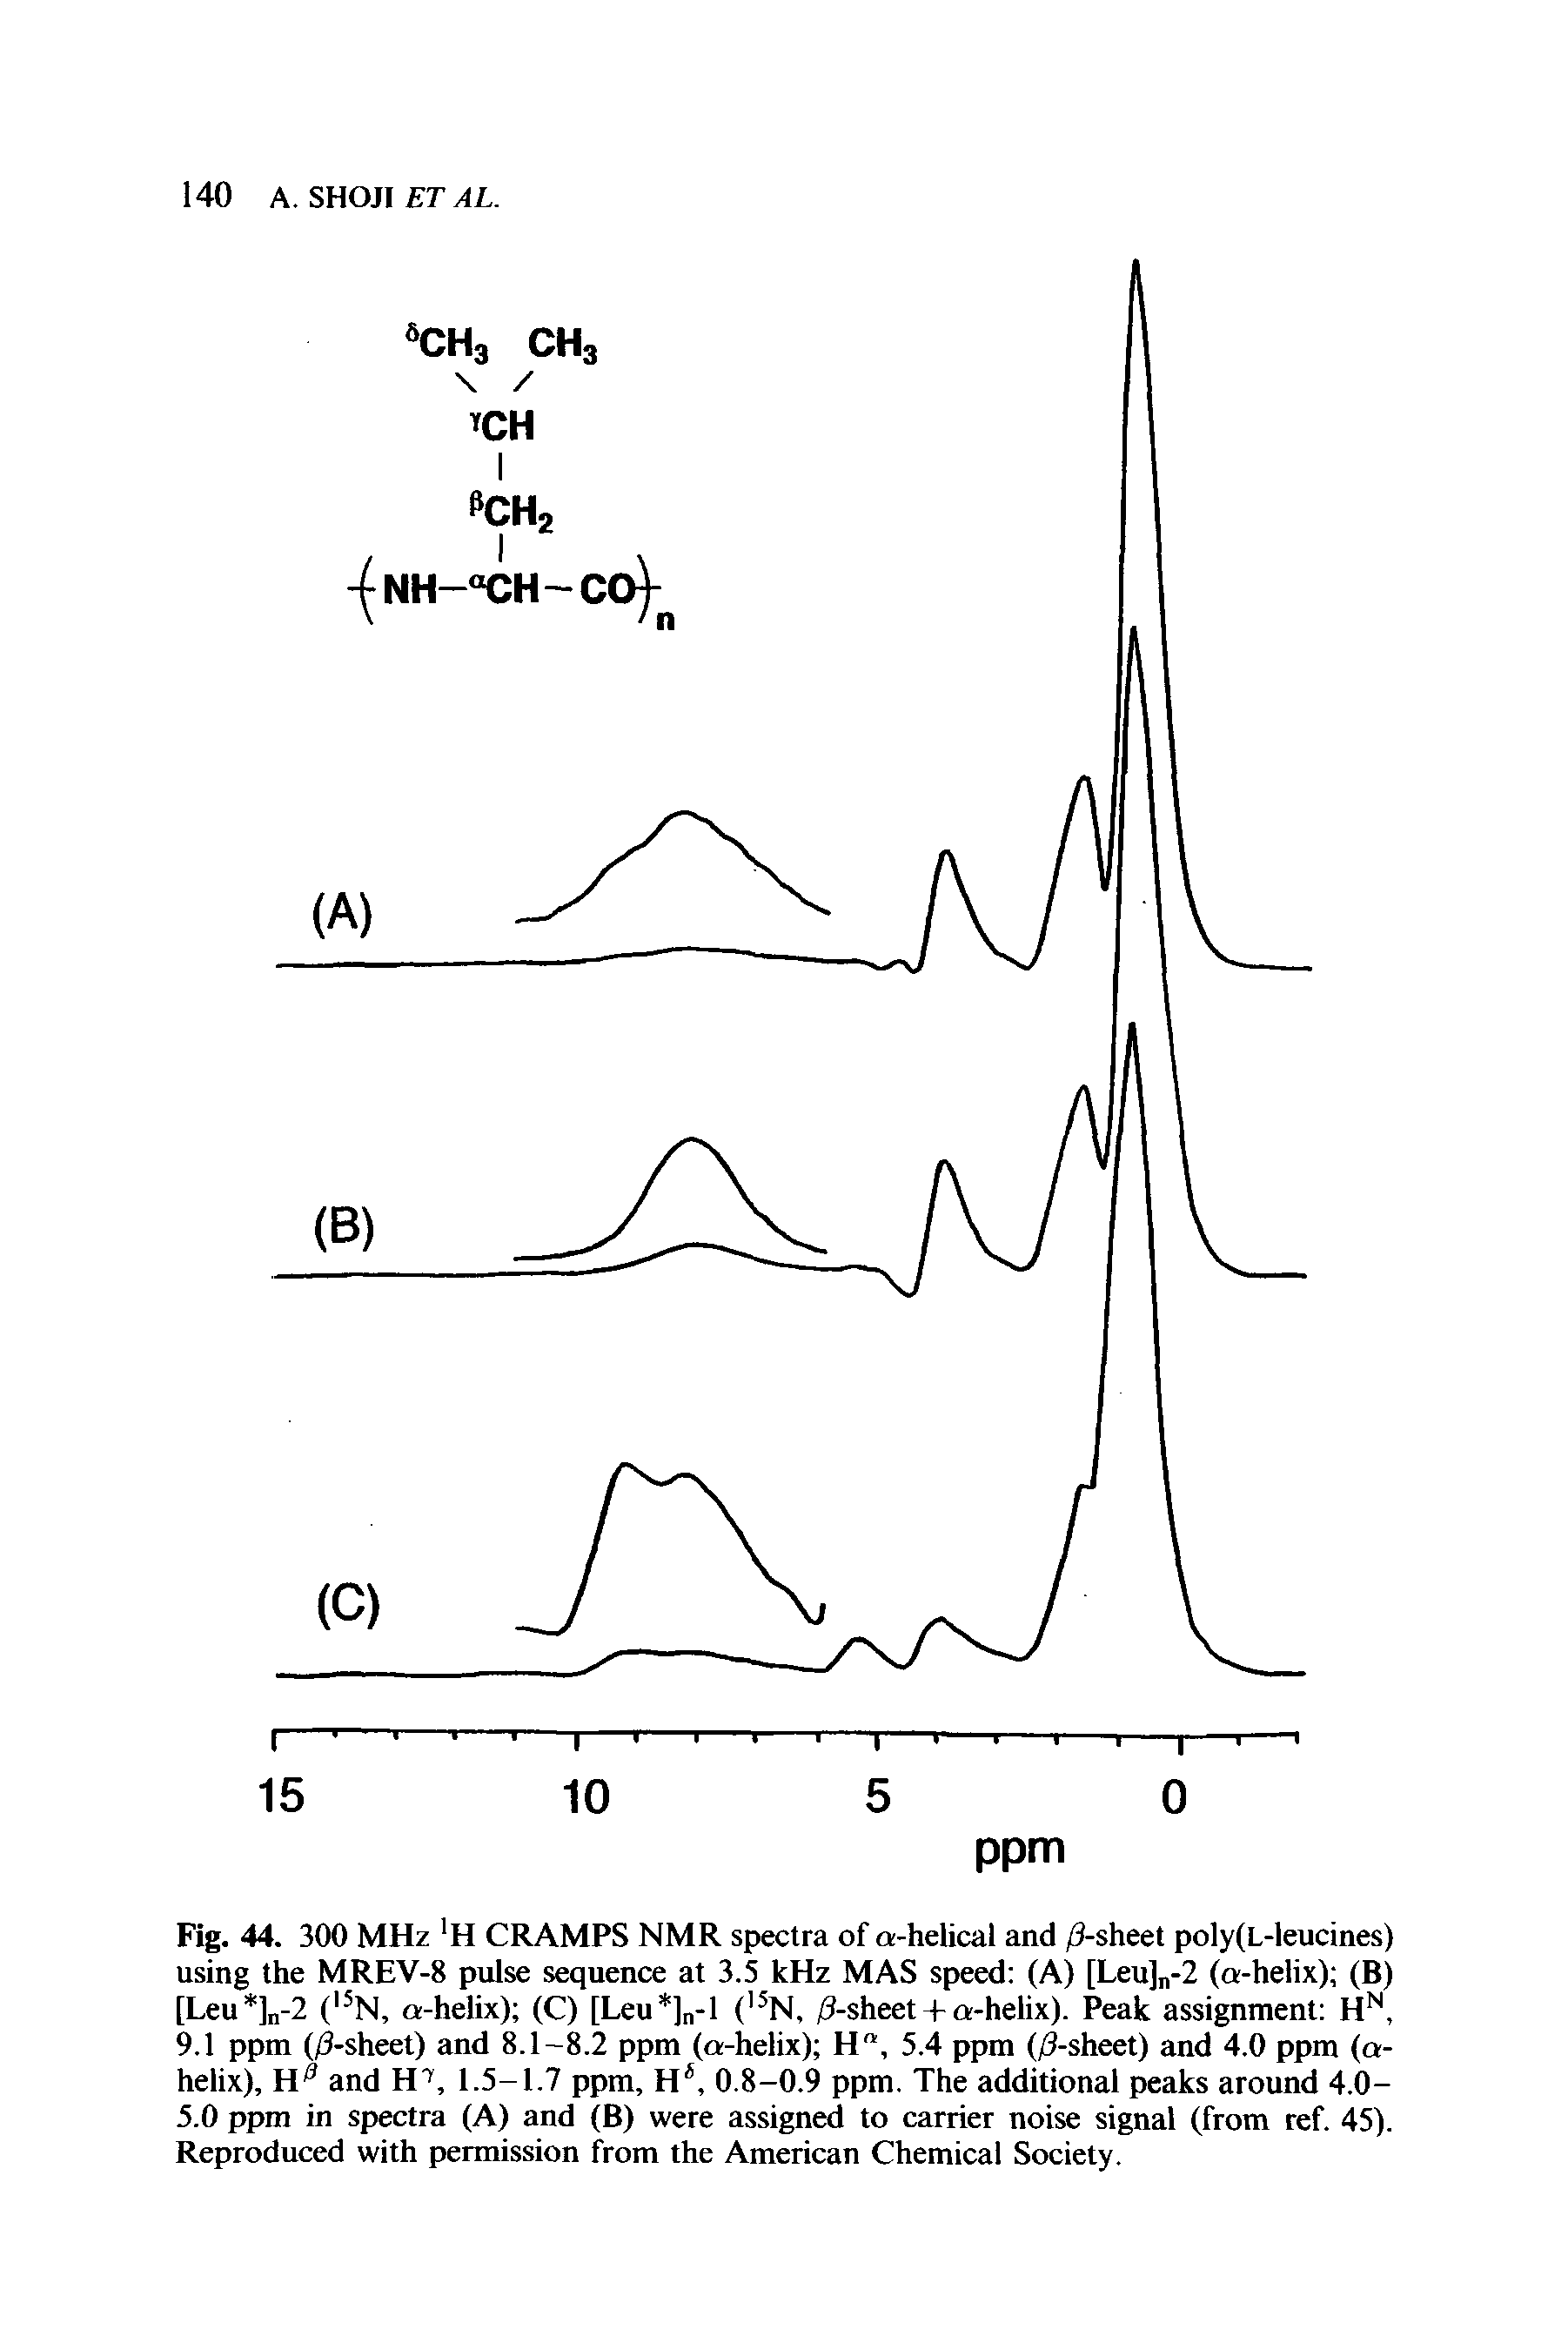 Fig. 44. 300 MHz H CRAMPS NMR spectra of a-helical and /3-sheet poly(L-leucines) using the MREV-8 pulse sequence at 3.5 kHz MAS speed (A) [Leu]n-2 (a-helix) (B) [Leu ] -2 ( N, a-helix) (C) [Leu ]n-1 ( N, /3-sheet + a-helix). Peak assignment H, 9.1 ppm (/3-sheet) and 8.1- 2 ppm (a-helix) H", 5.4 ppm (/3-sheet) and 4.0 ppm (a-helix), H and H >, 1.5-1.7 ppm, H, 0.8-0.9 ppm. The additional peaks around 4.0-5.0 ppm in spectra (A) and (B) were assigned to carrier noise signal (from ref. 45). Reproduced with permission from the American Chemical Society.